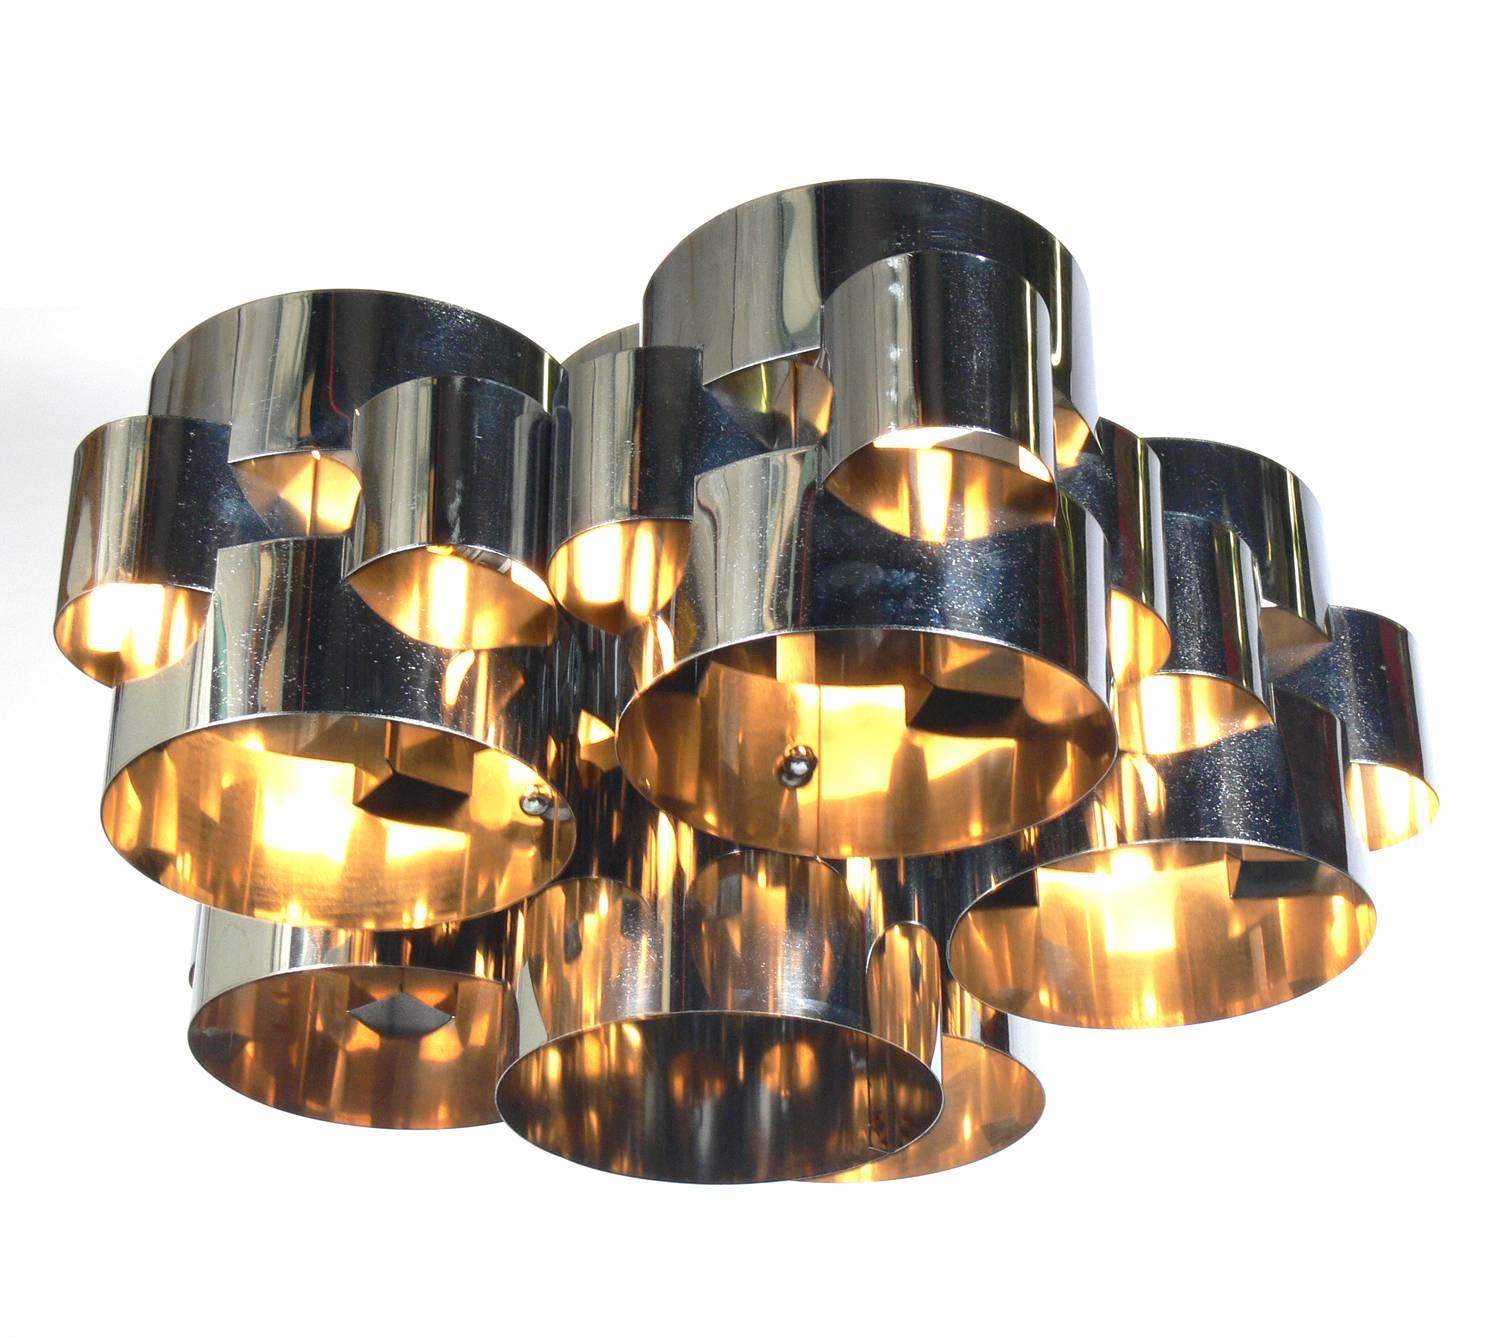 Modernist chrome chandelier by Curtis Jere, American, circa 1970s. Looks incredible when lit!